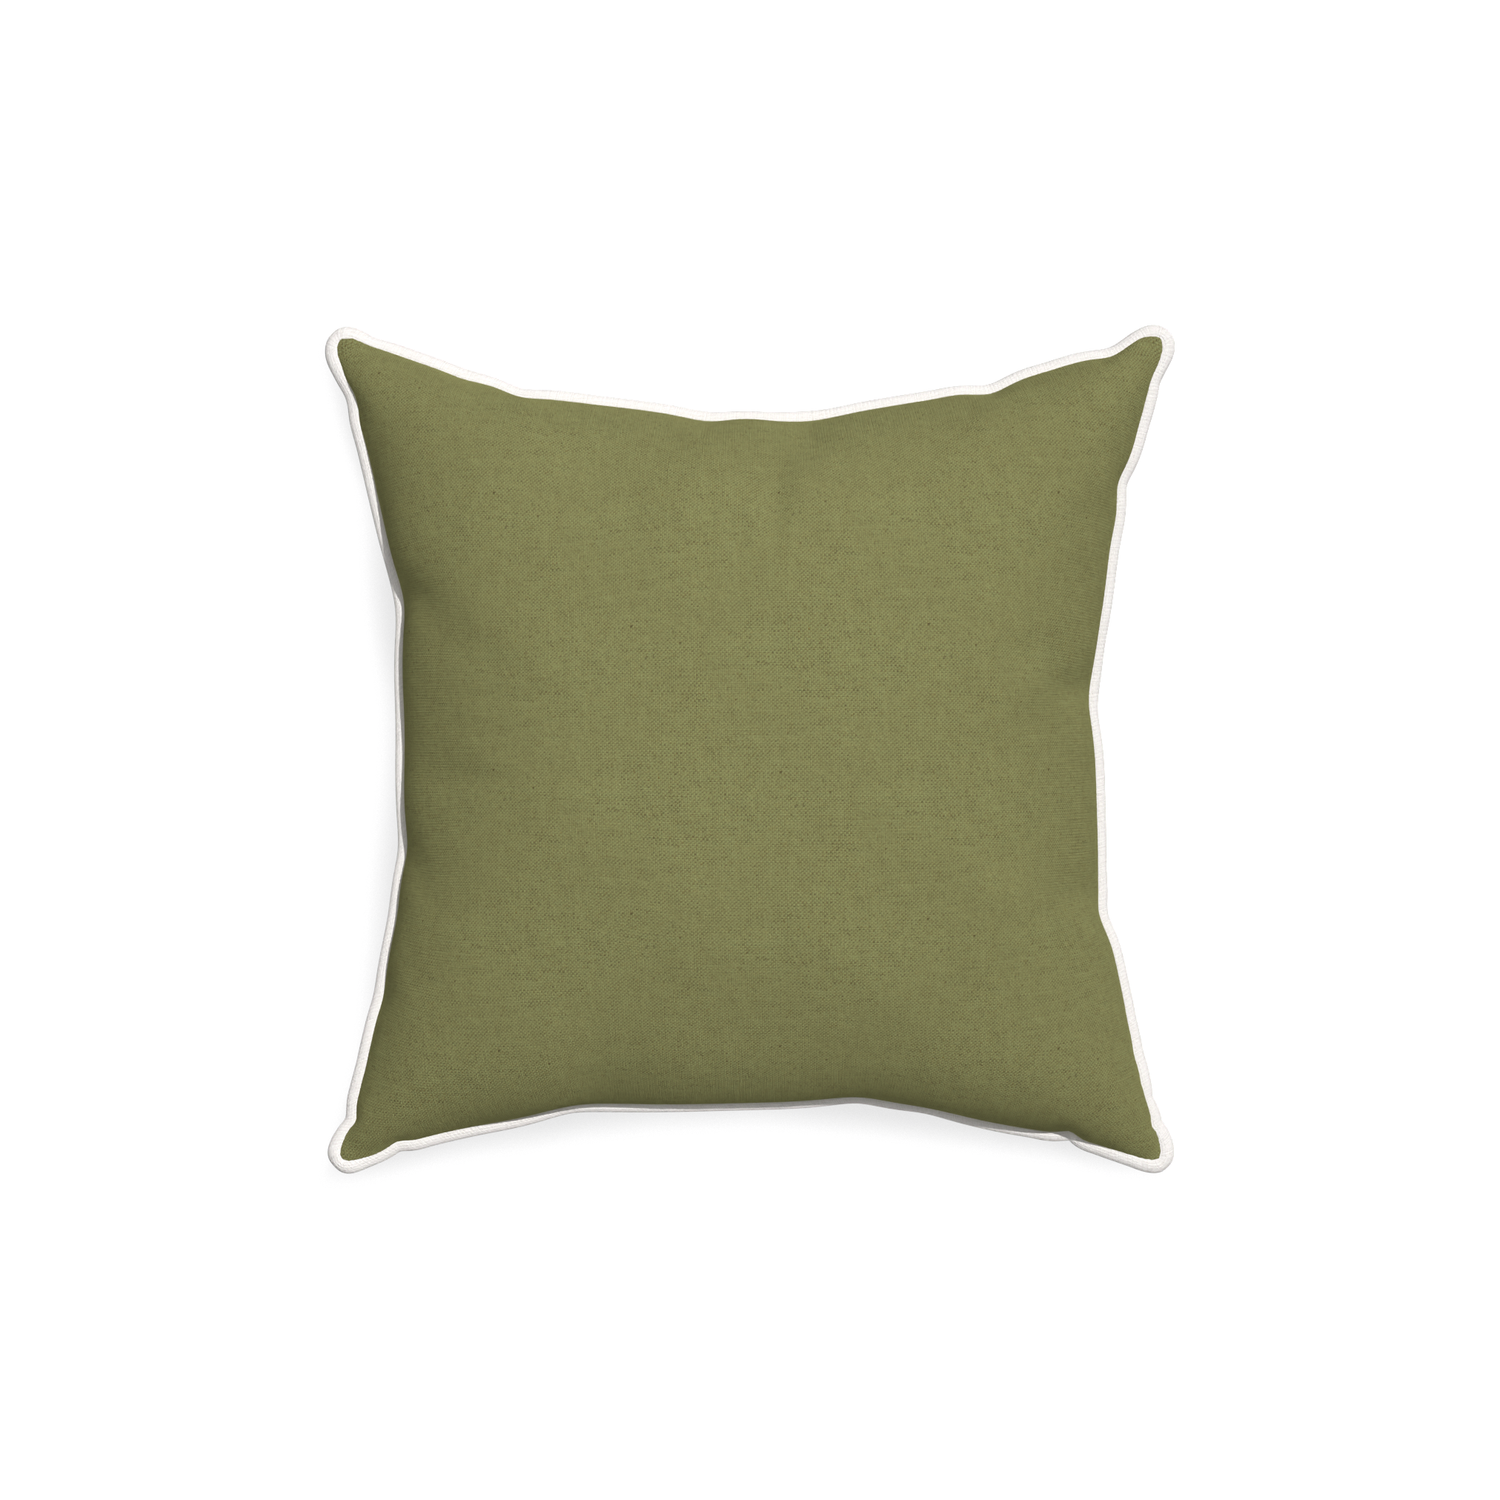 18-square moss custom moss greenpillow with snow piping on white background